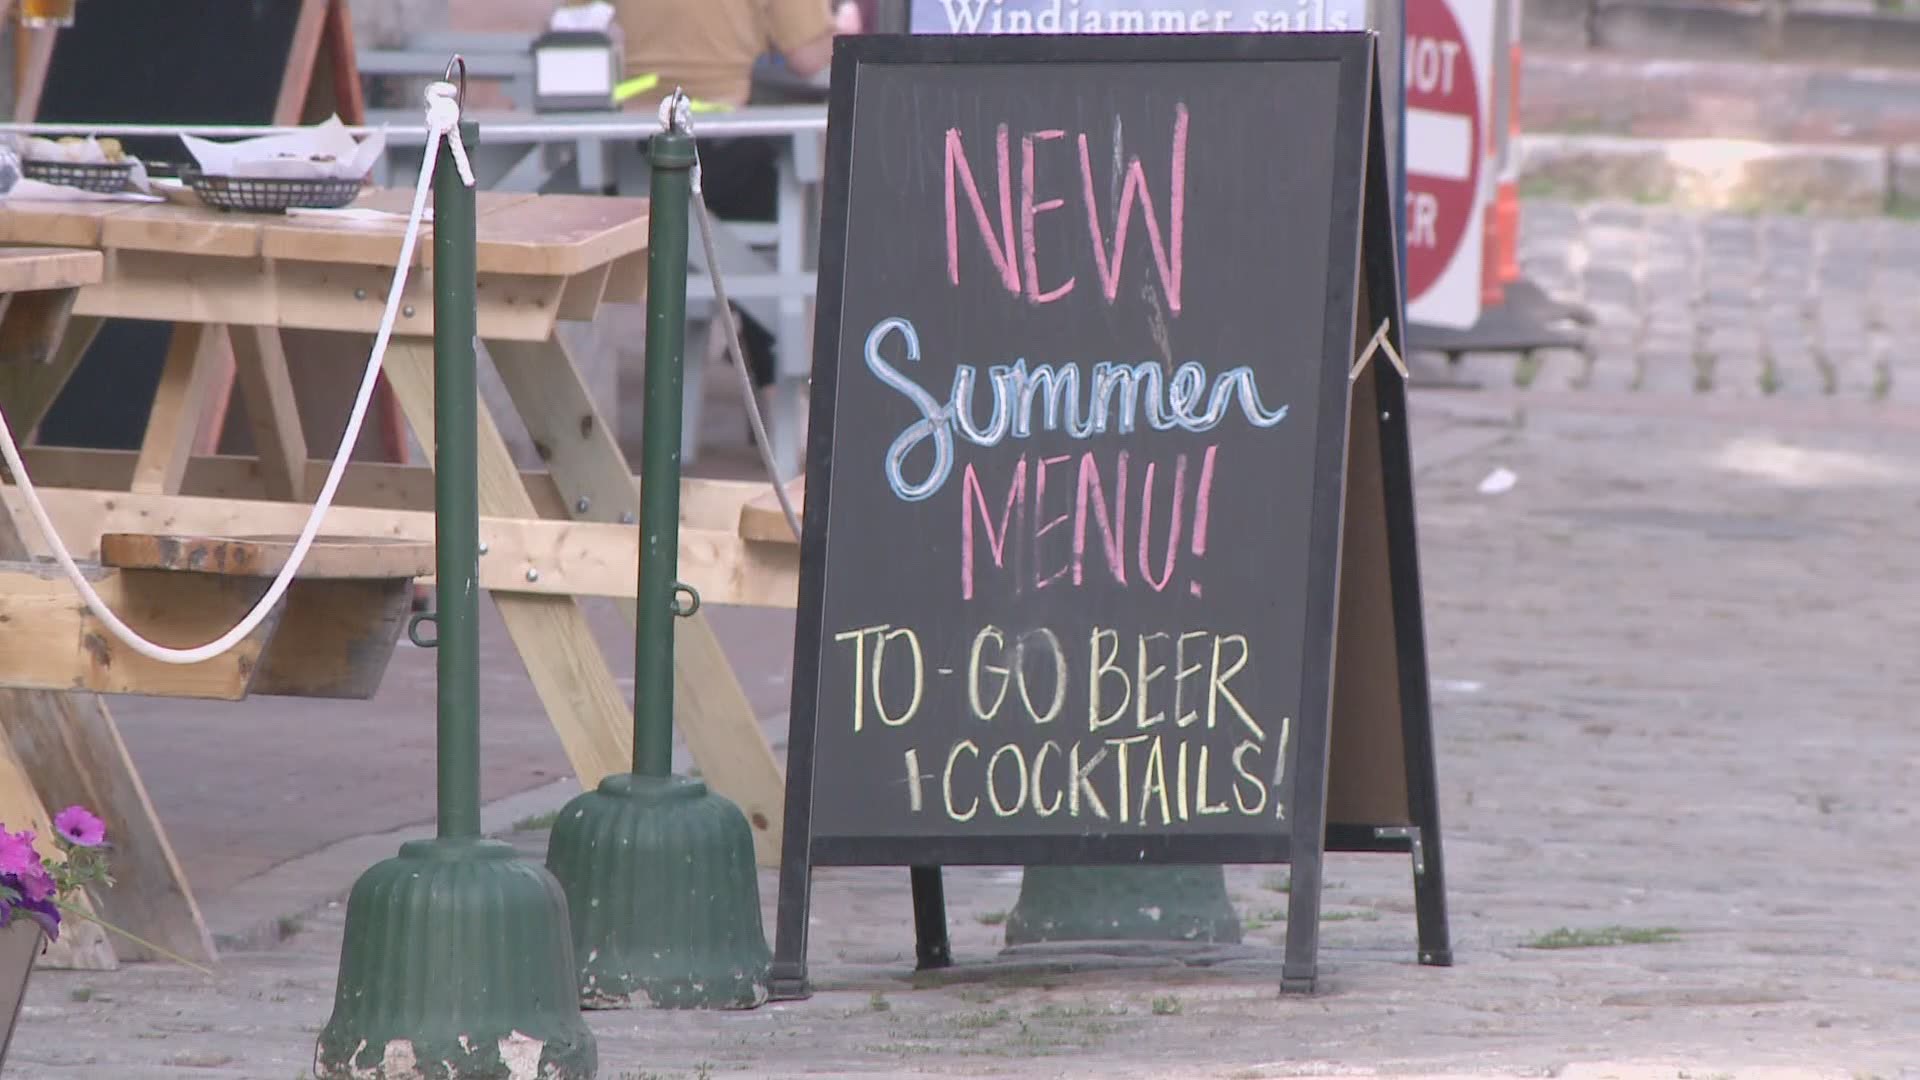 Restaurants in Androscoggin, Cumberland, and York Counties can reopen to dine-in customers beginning June 17 with added health and safety precautions.